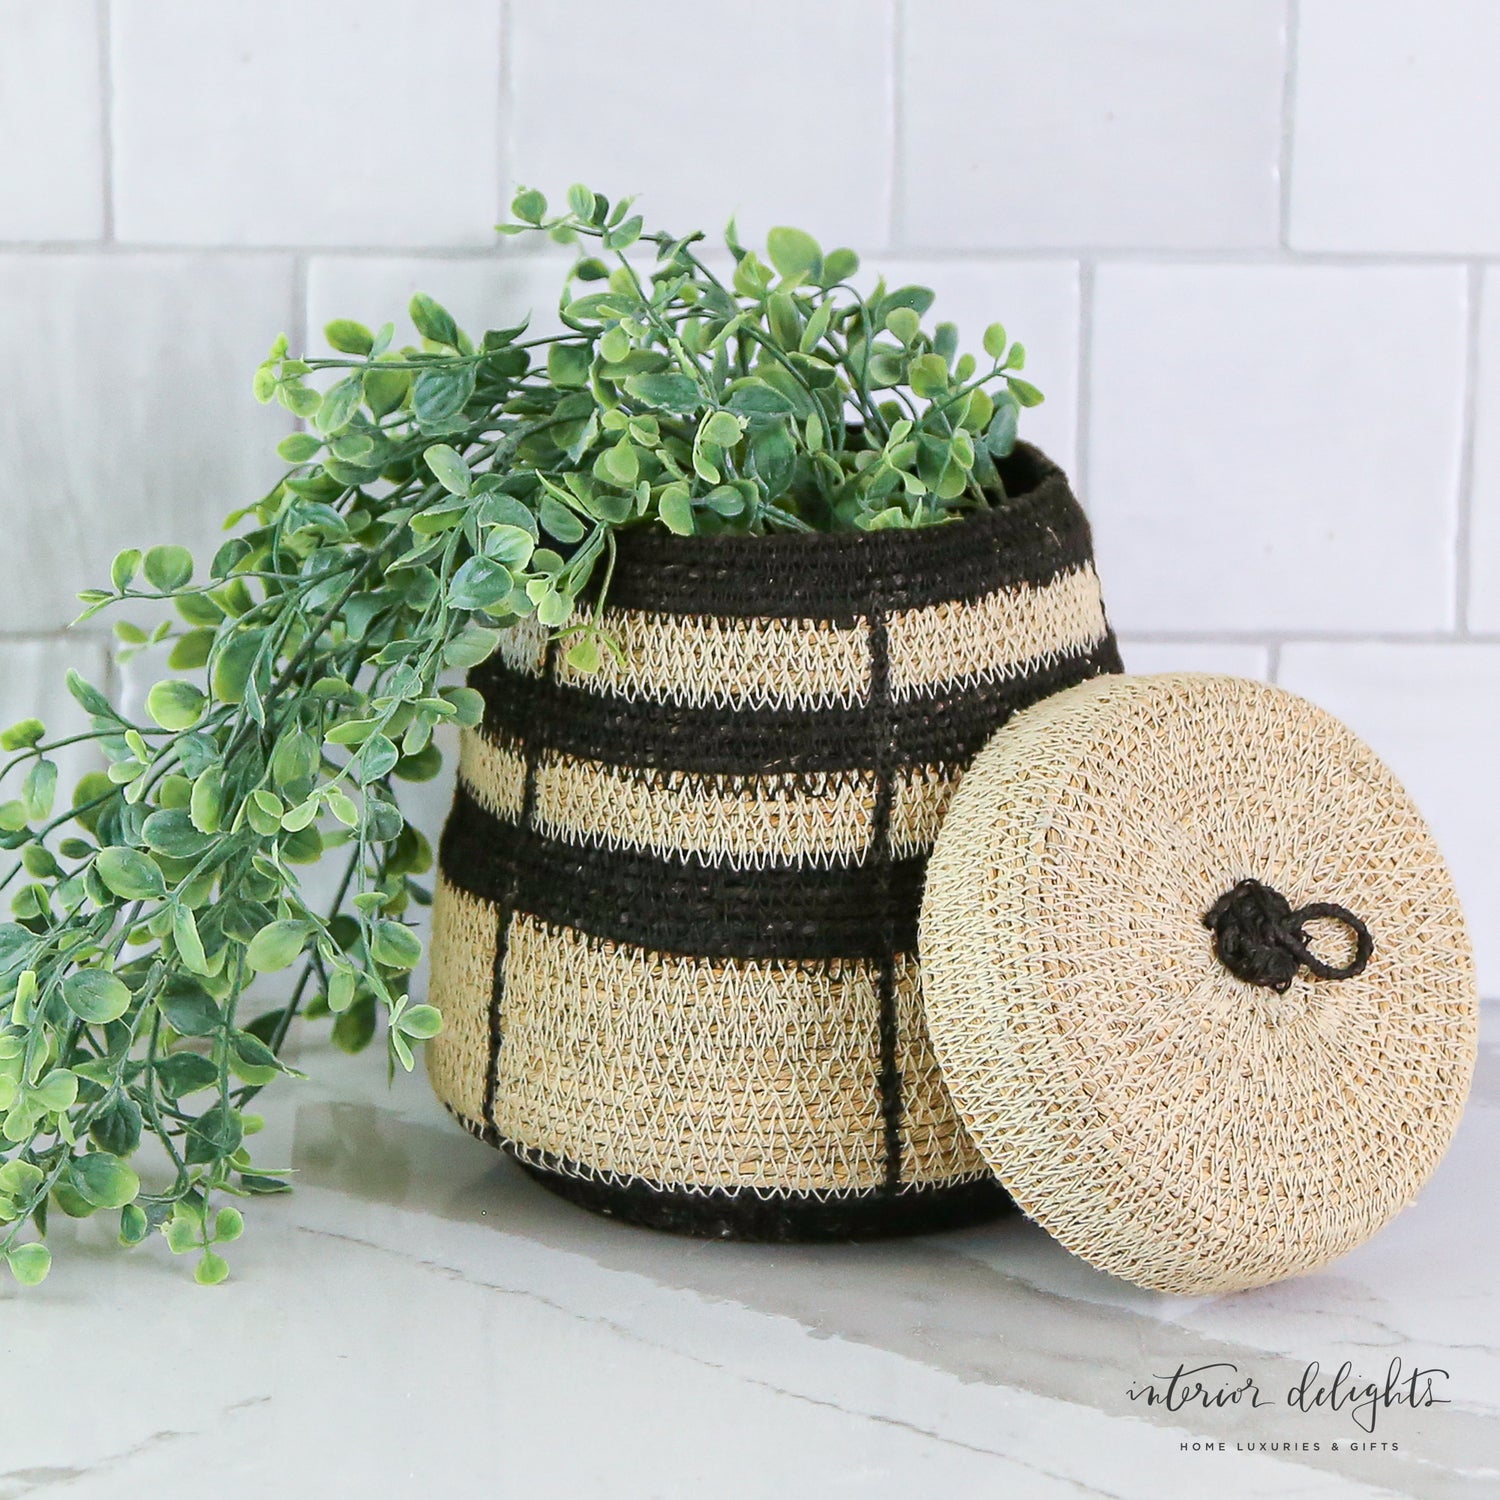 Seagrass Basket with Lid